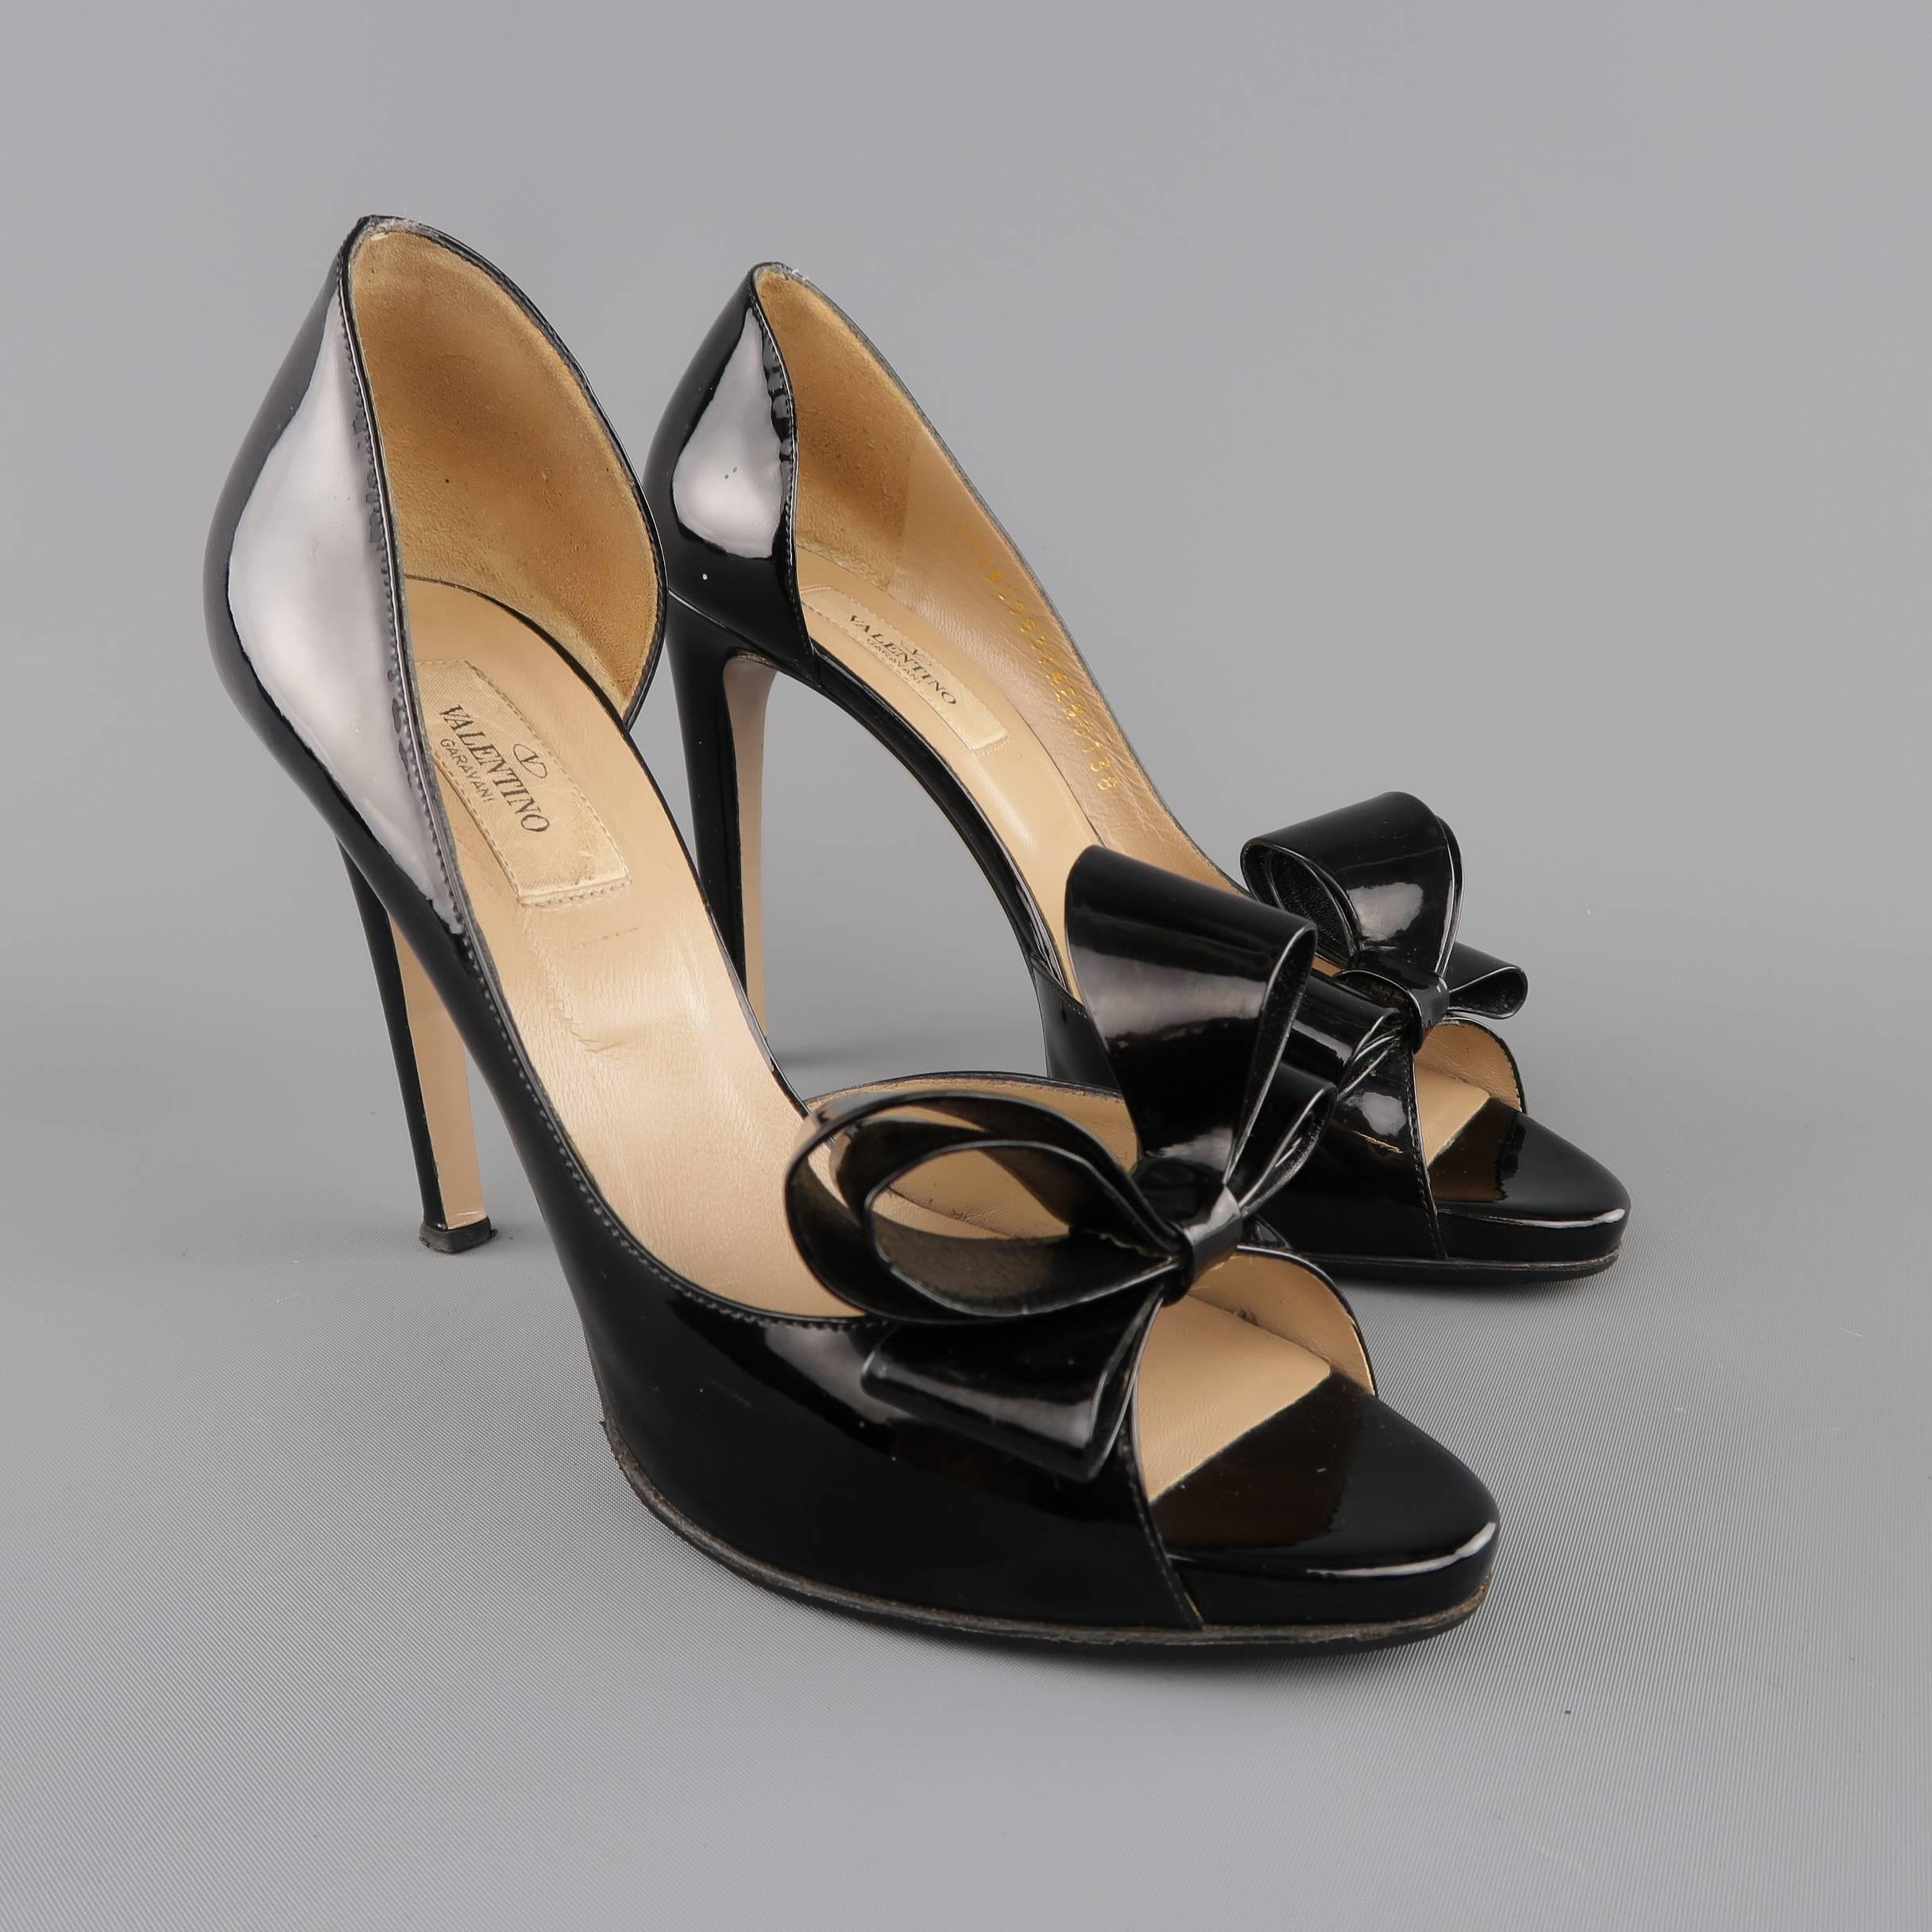 VALENTINO d'orsay pumps come in high gloss patent leather and feature a covered platform, peep toe, and structural bow detail. Made in Italy.
 
Good Pre-Owned Condition.
Marked: IT 38
 
Measurements:
 
Heel: 4 in.
Platform: 0.5 in.

SKU: 83824